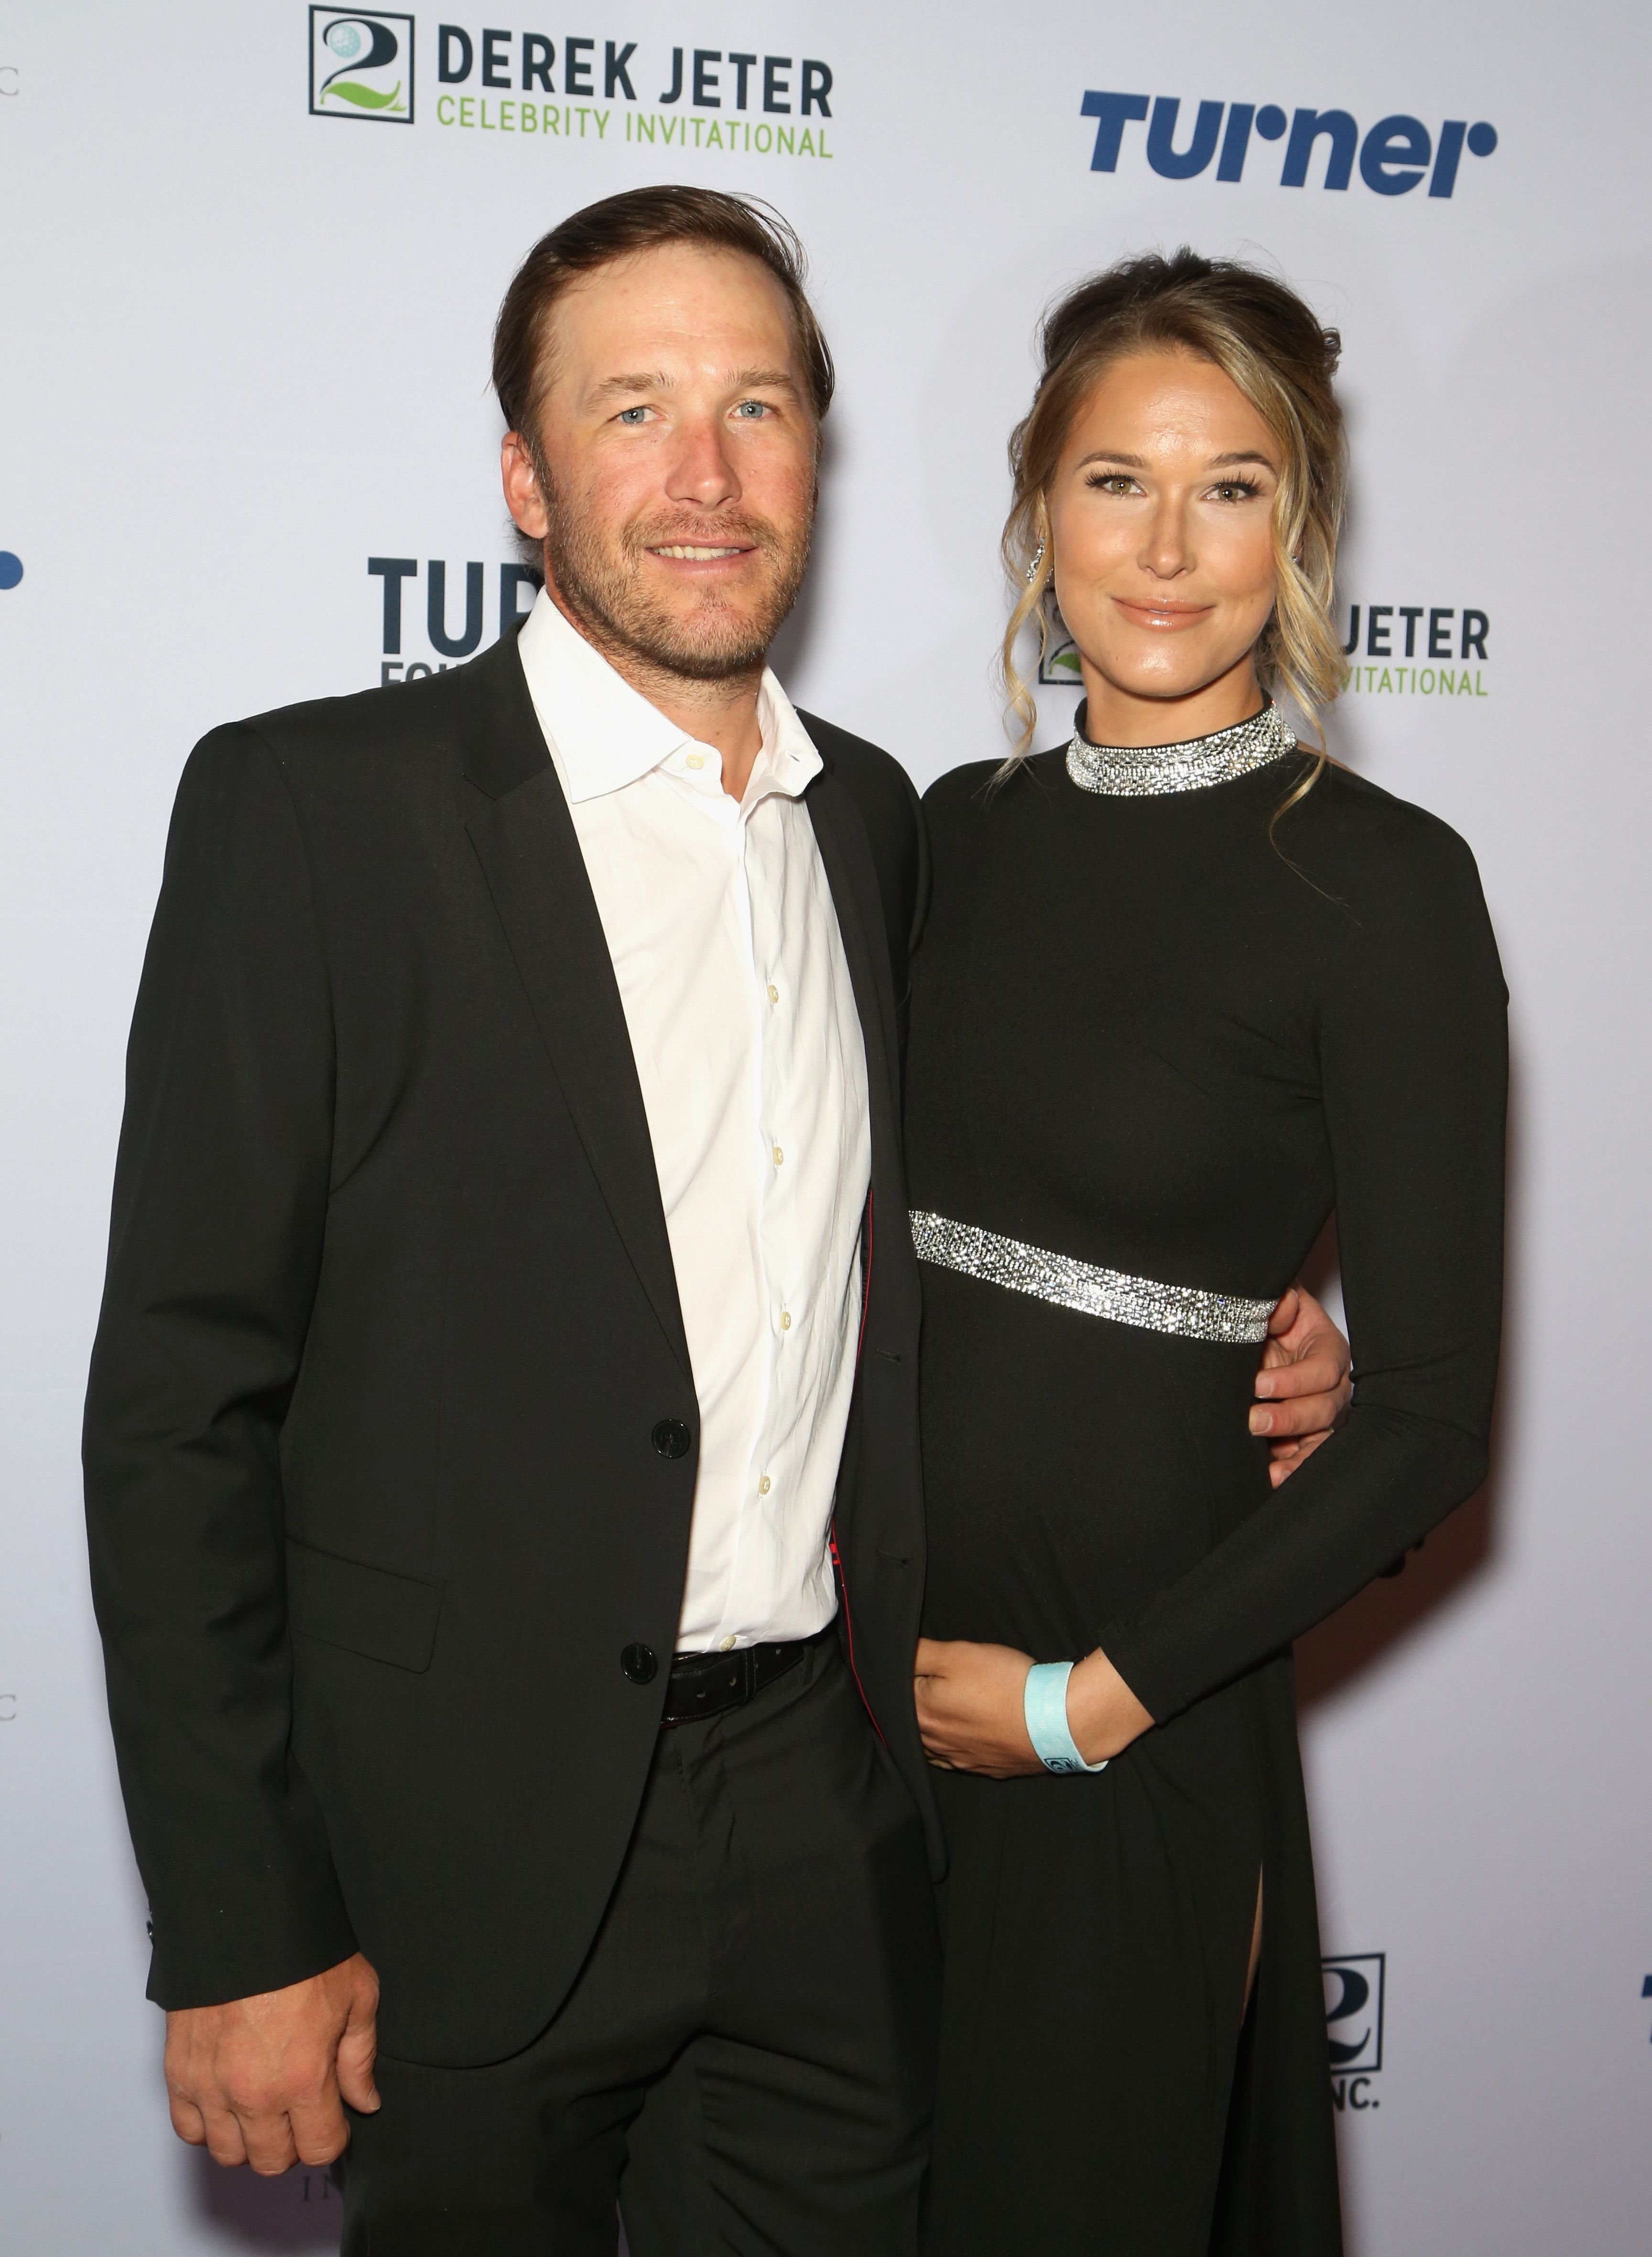 Bode Miller and his wife, Morgan Beck, attend the 2018 Derek Jeter Celebrity Invitational gala at the Aria Resort & Casino on April 19, 2018 in Las Vegas, Nevada | Photo: Getty Images